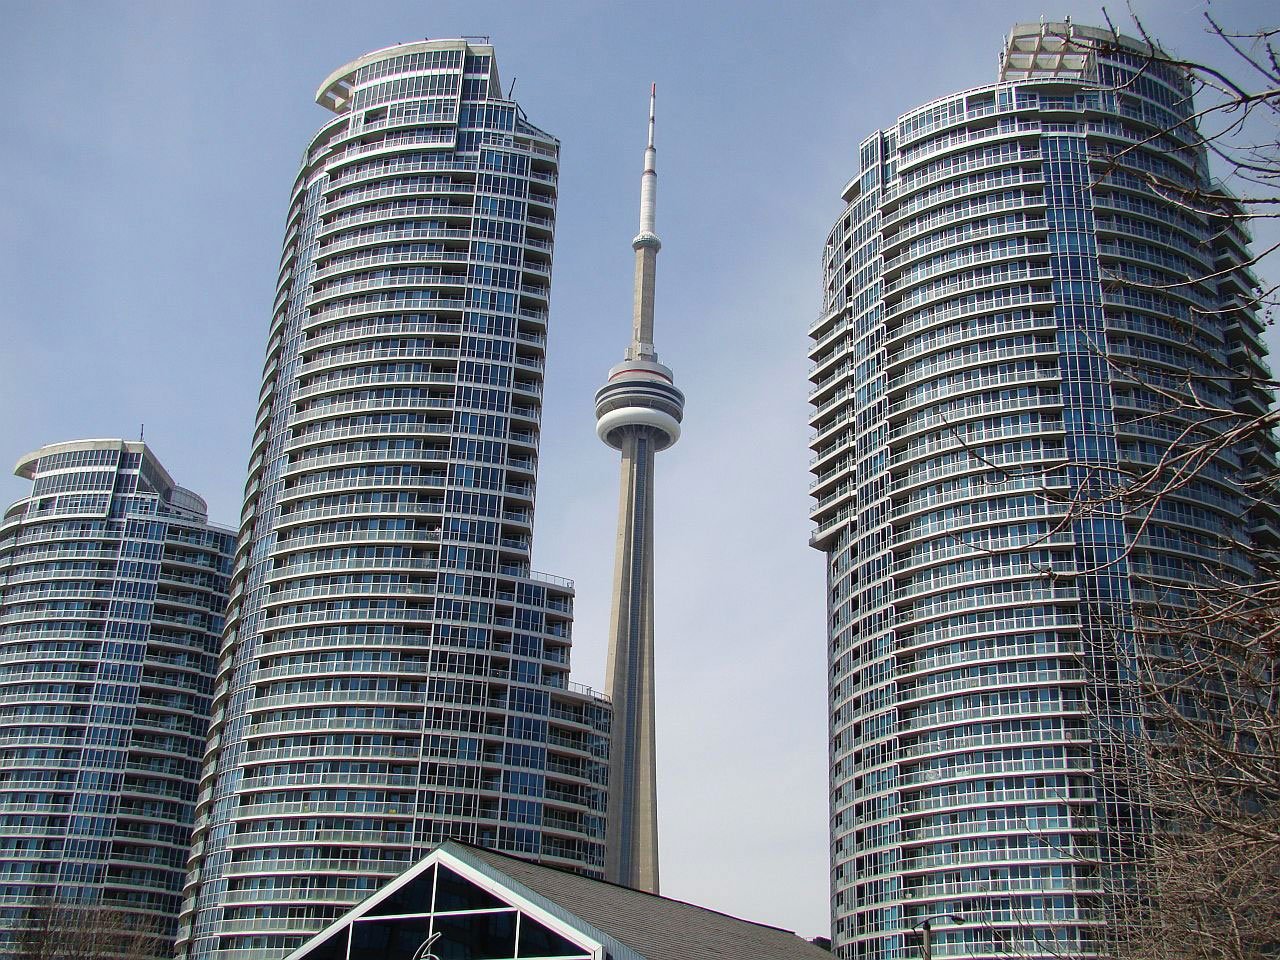 Toronto Condos Prices Are Rising Faster Than Any Other Home Type